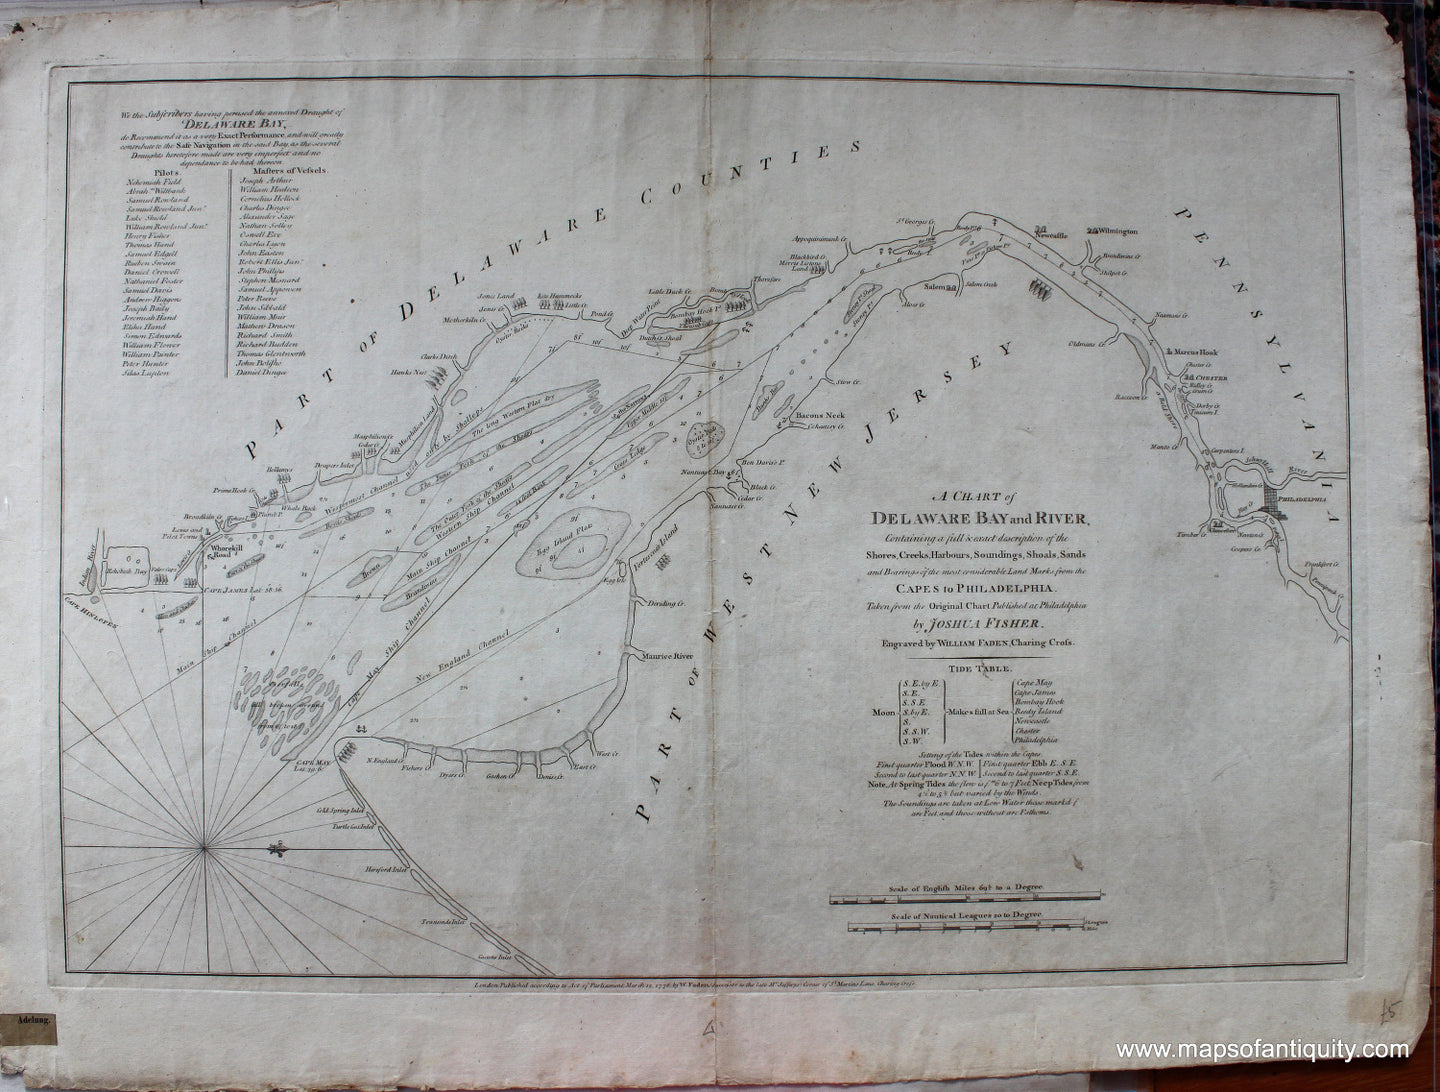 Black-and-White-Antique-Chart-A-Chart-of-Delaware-Bay-and-River-****-United-States-Mid-Atlantic-1776-Joshua-Fisher-Maps-Of-Antiquity